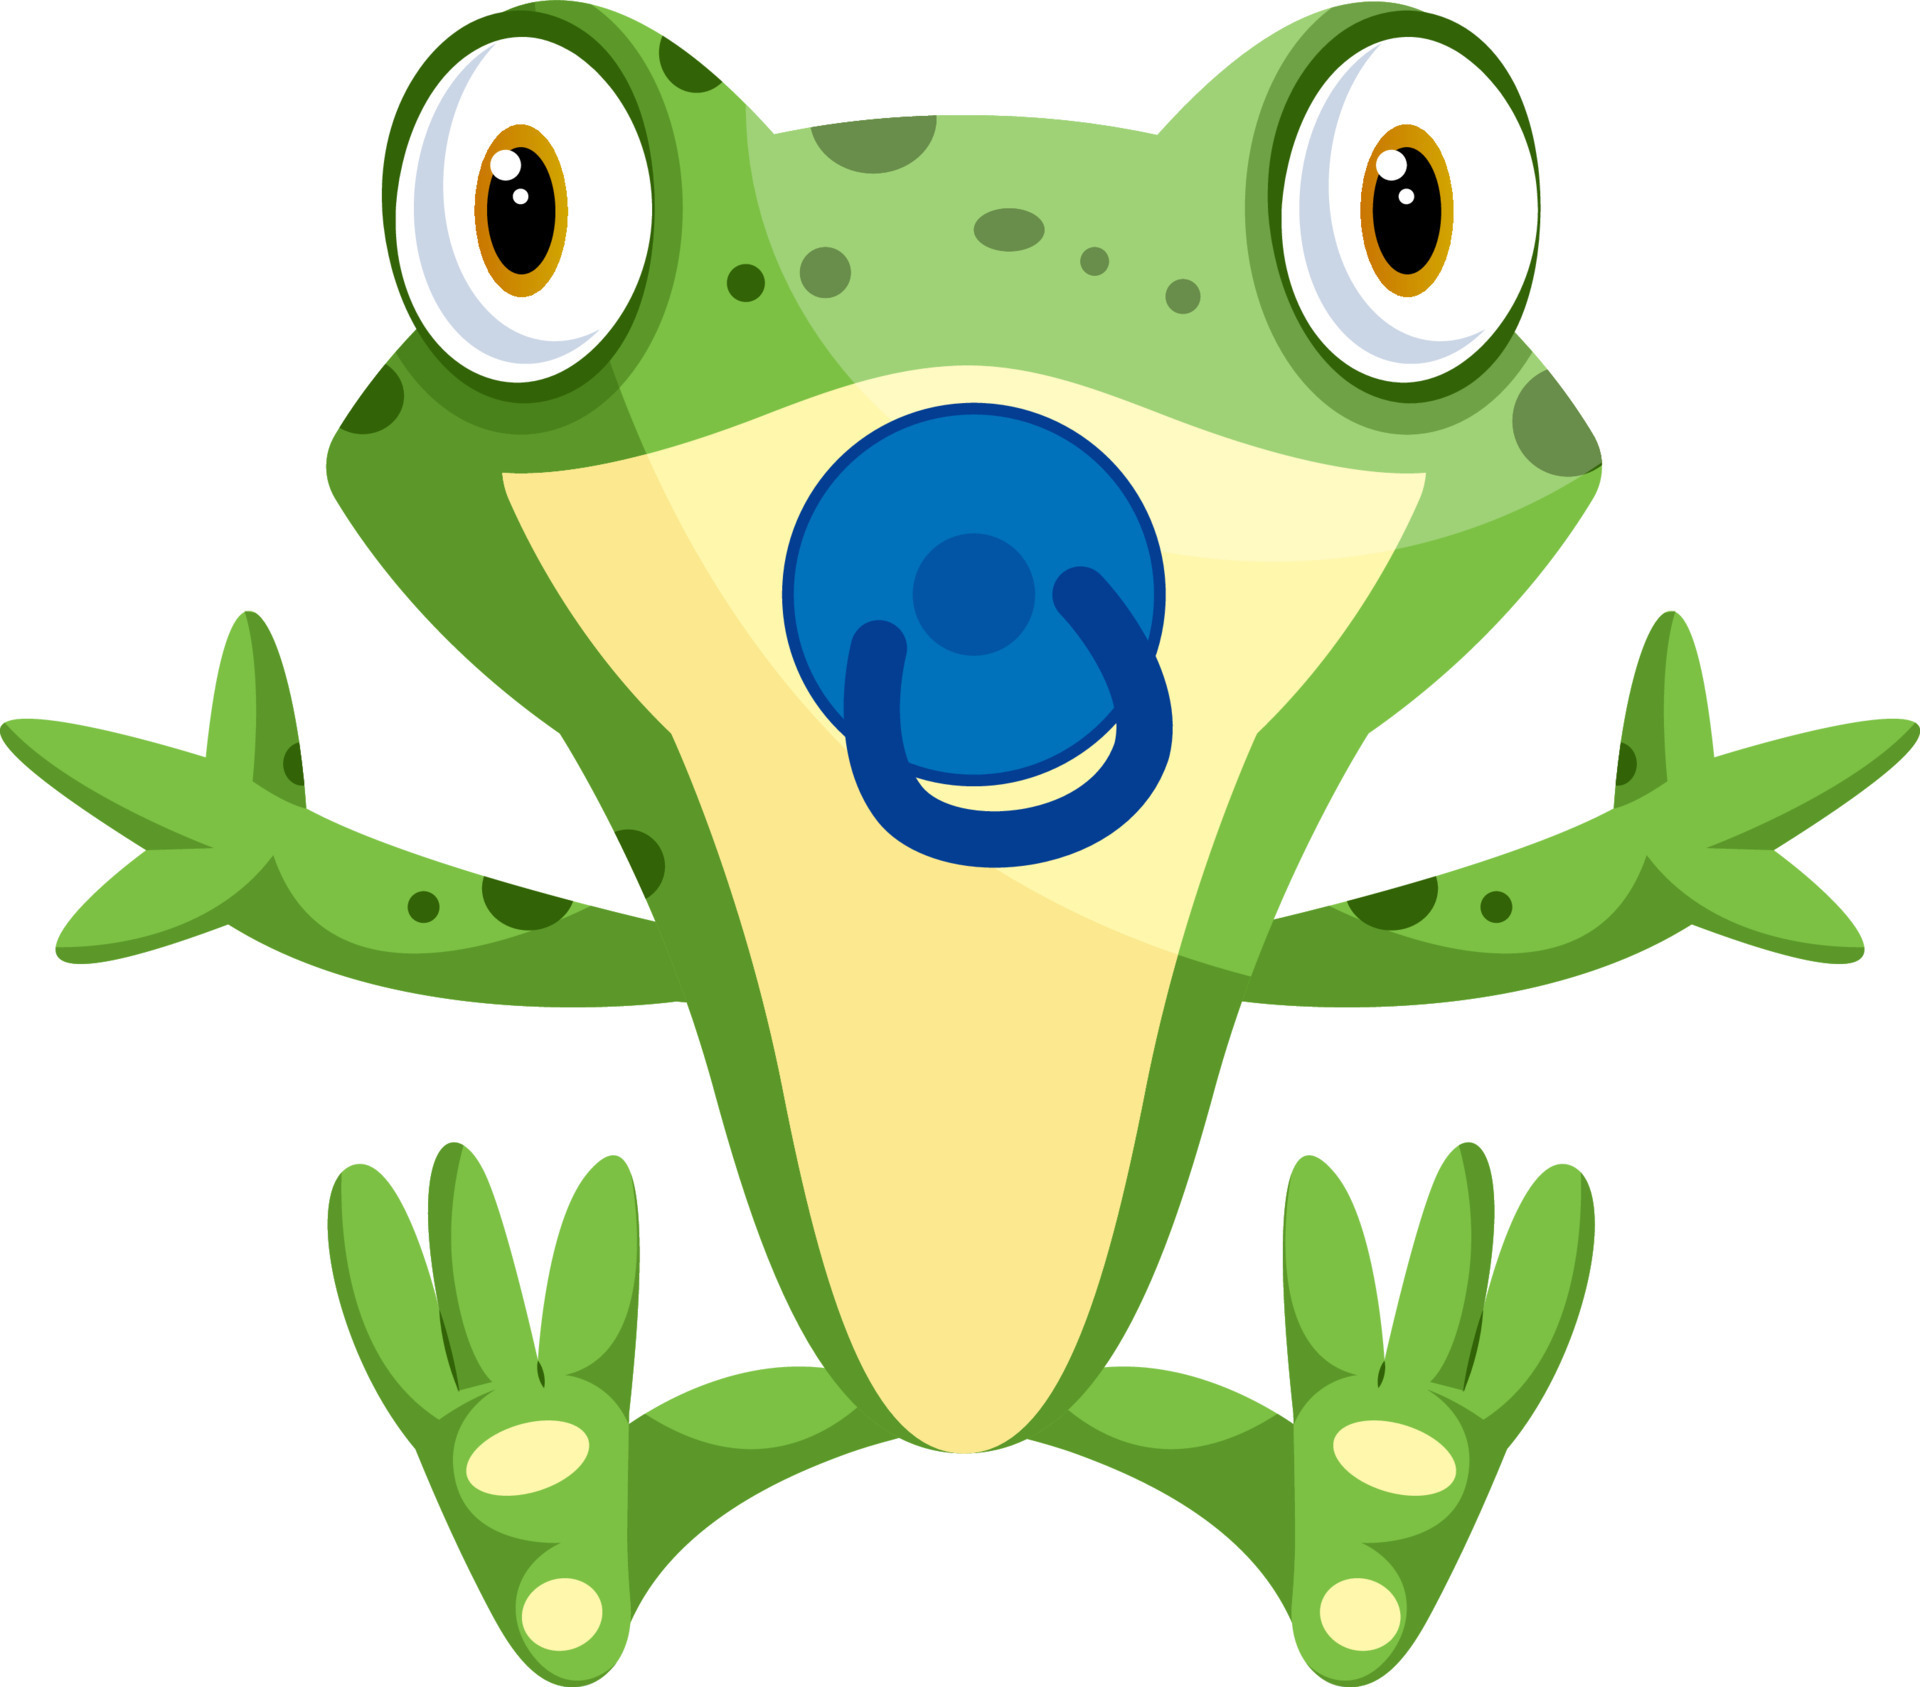 Cute baby frog with a pacifier, illustration, vector on white